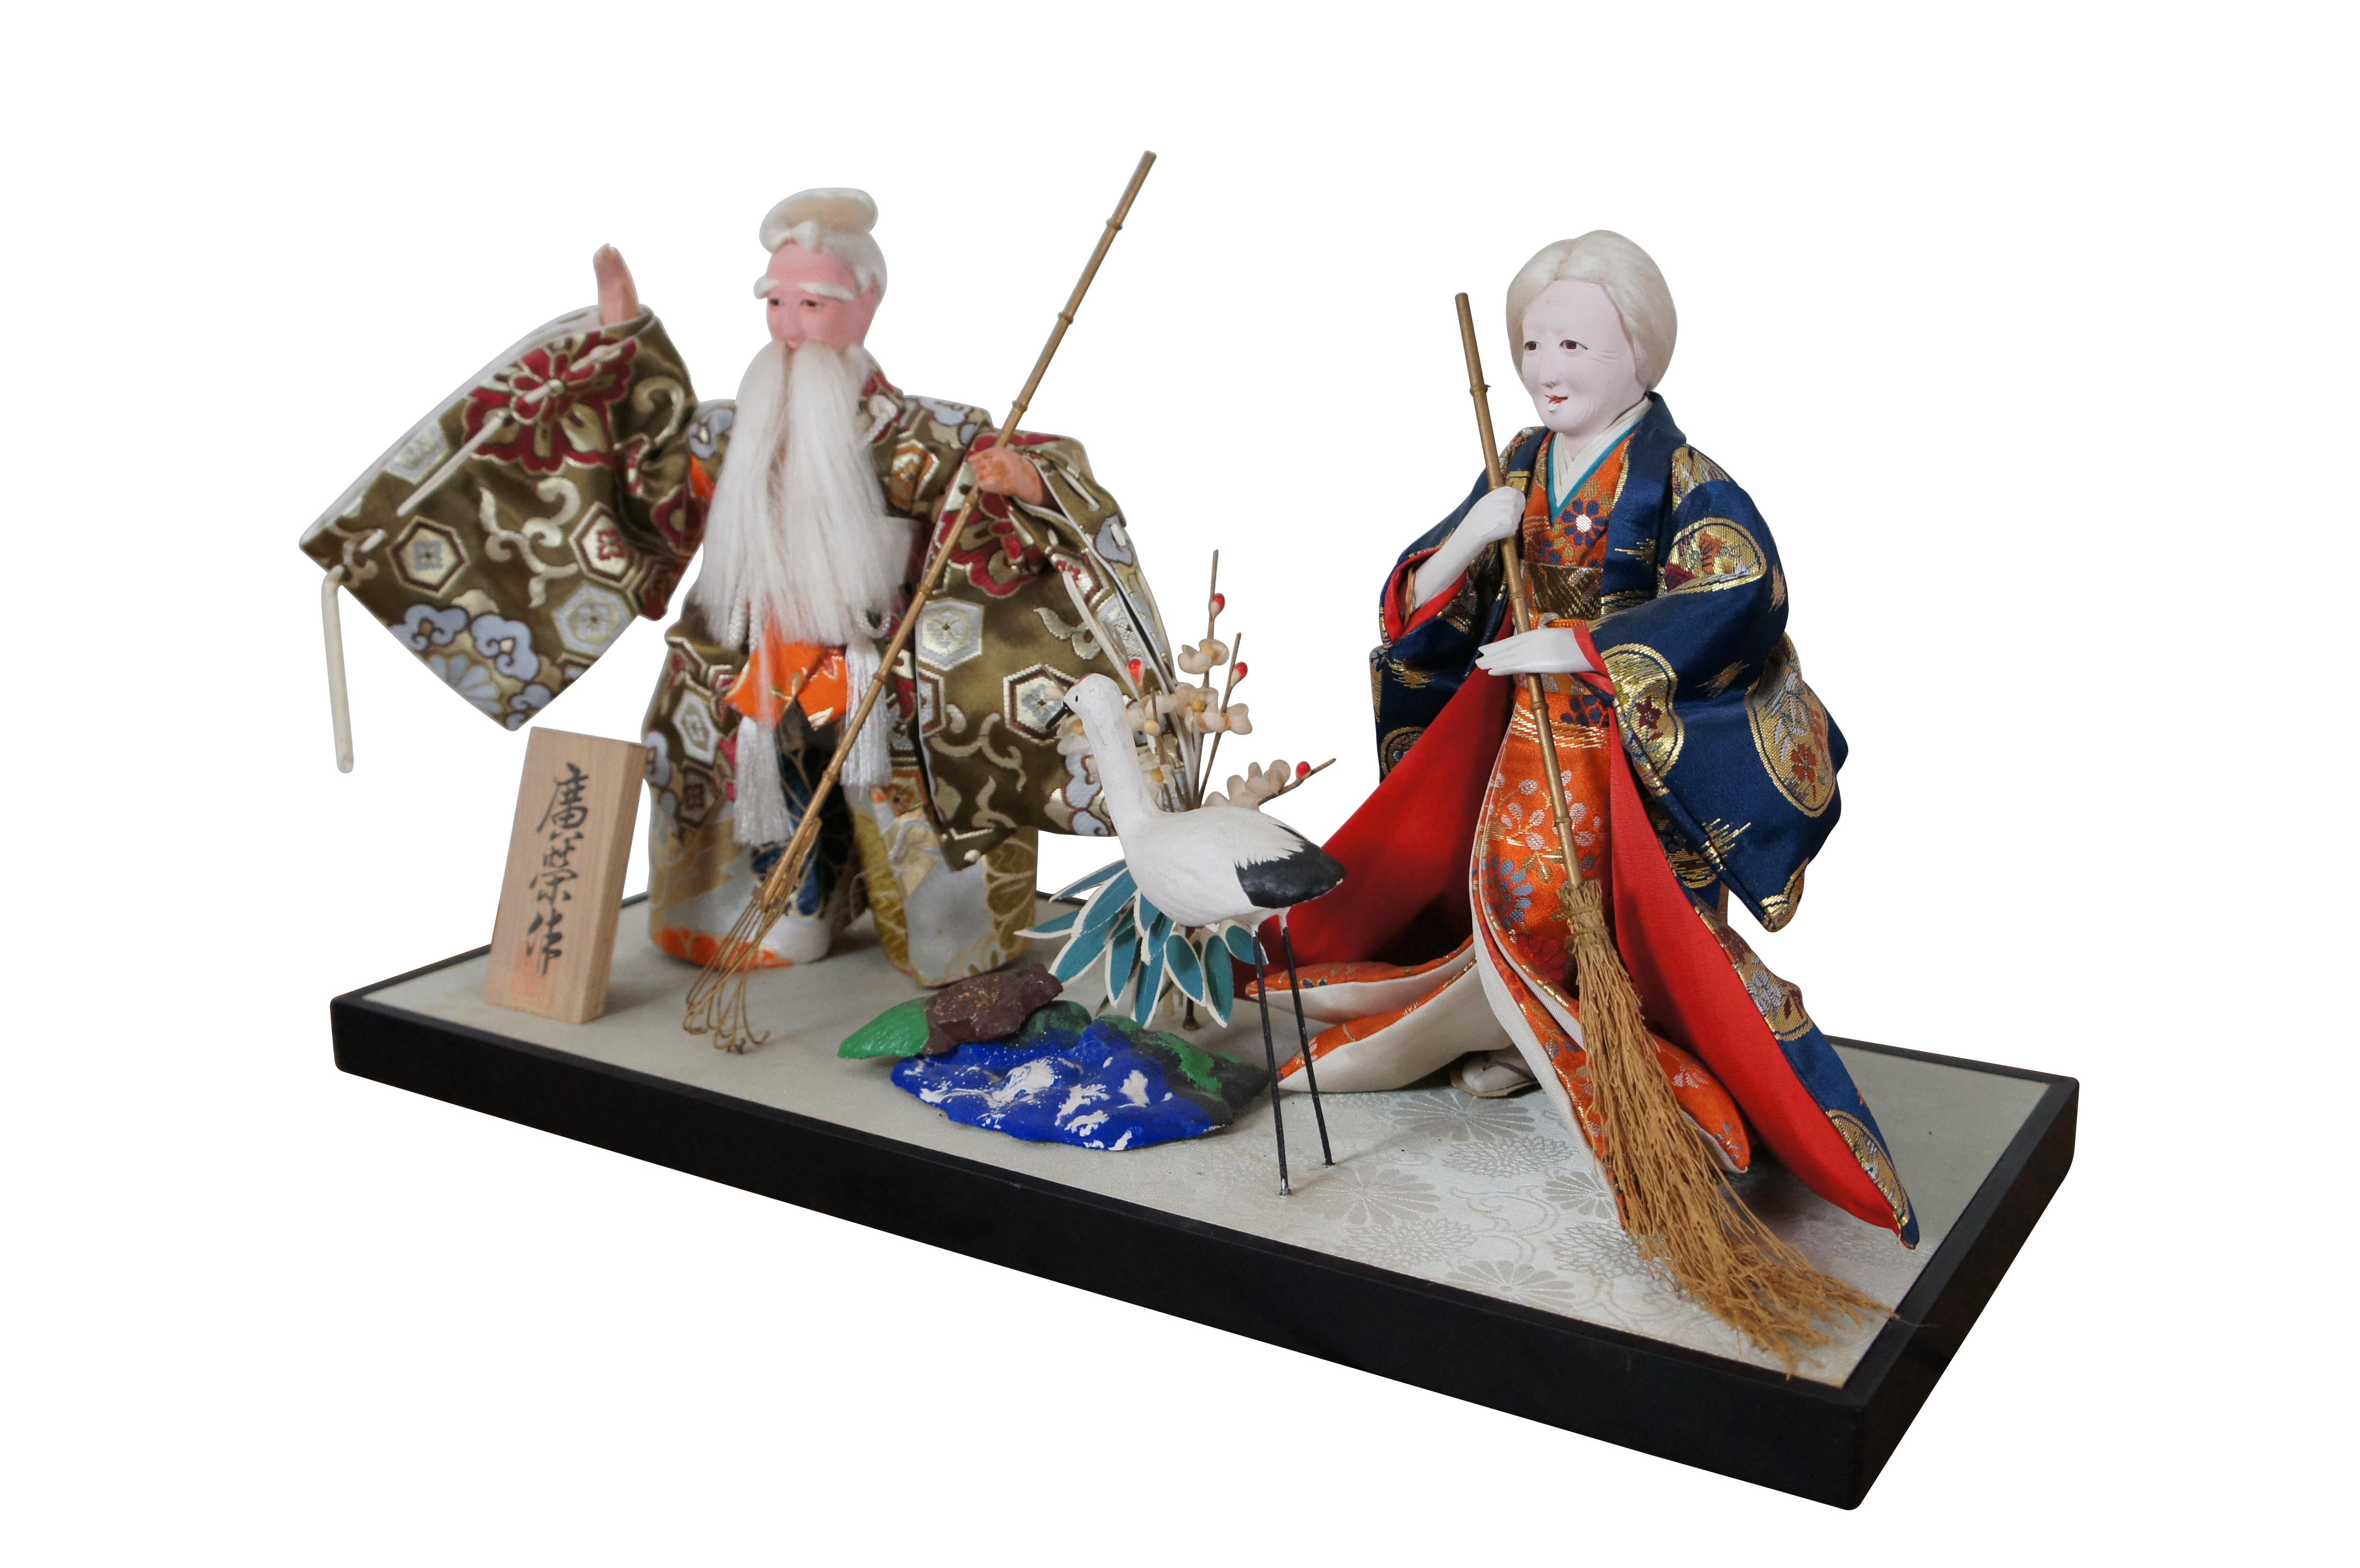 Vintage Japanese doll pair depicting a Noh theater / play, 